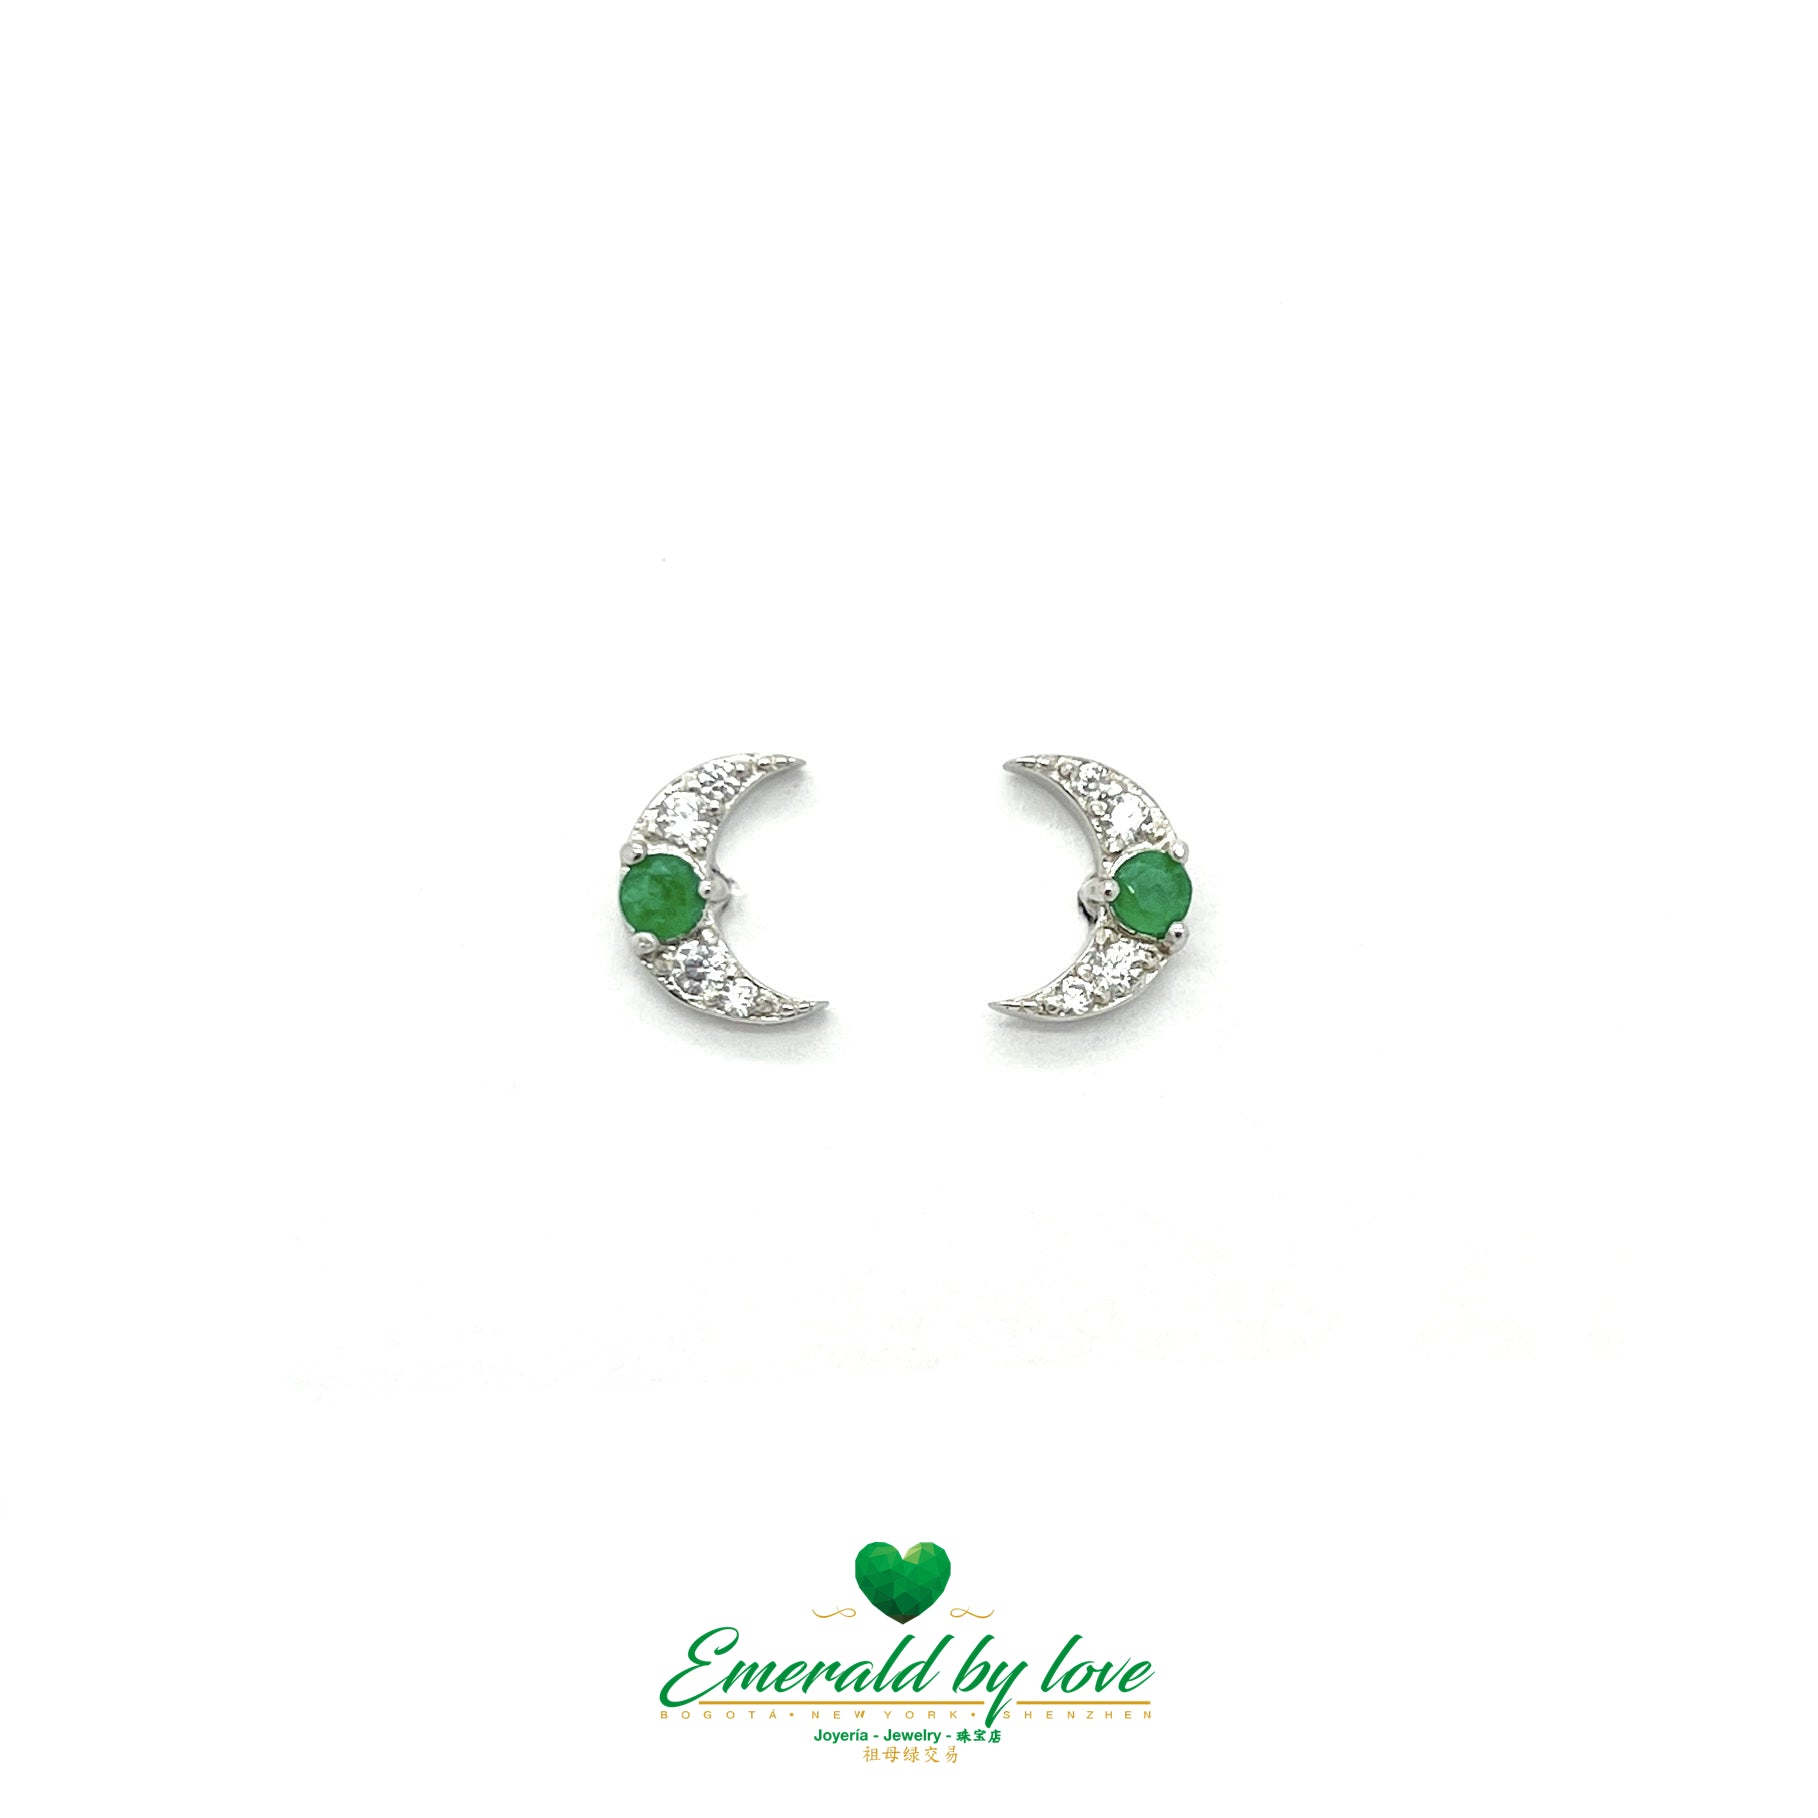 Sterling Silver Crescent Moon Design Earrings with Round Central Emerald